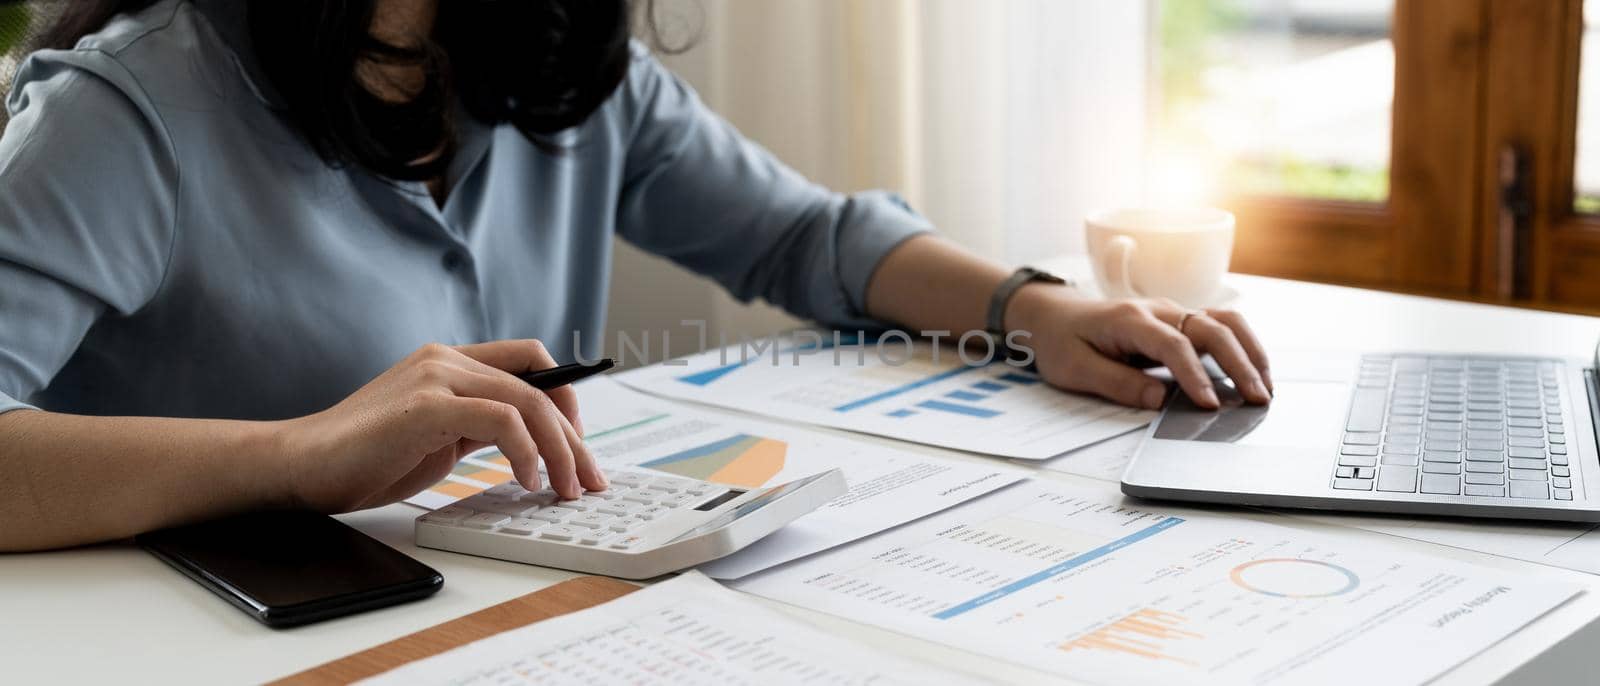 Close up young woman using calculator and laptop, checking domestic bills, sitting at table with financial documents, managing planning budget, accounting expenses, browsing internet service.